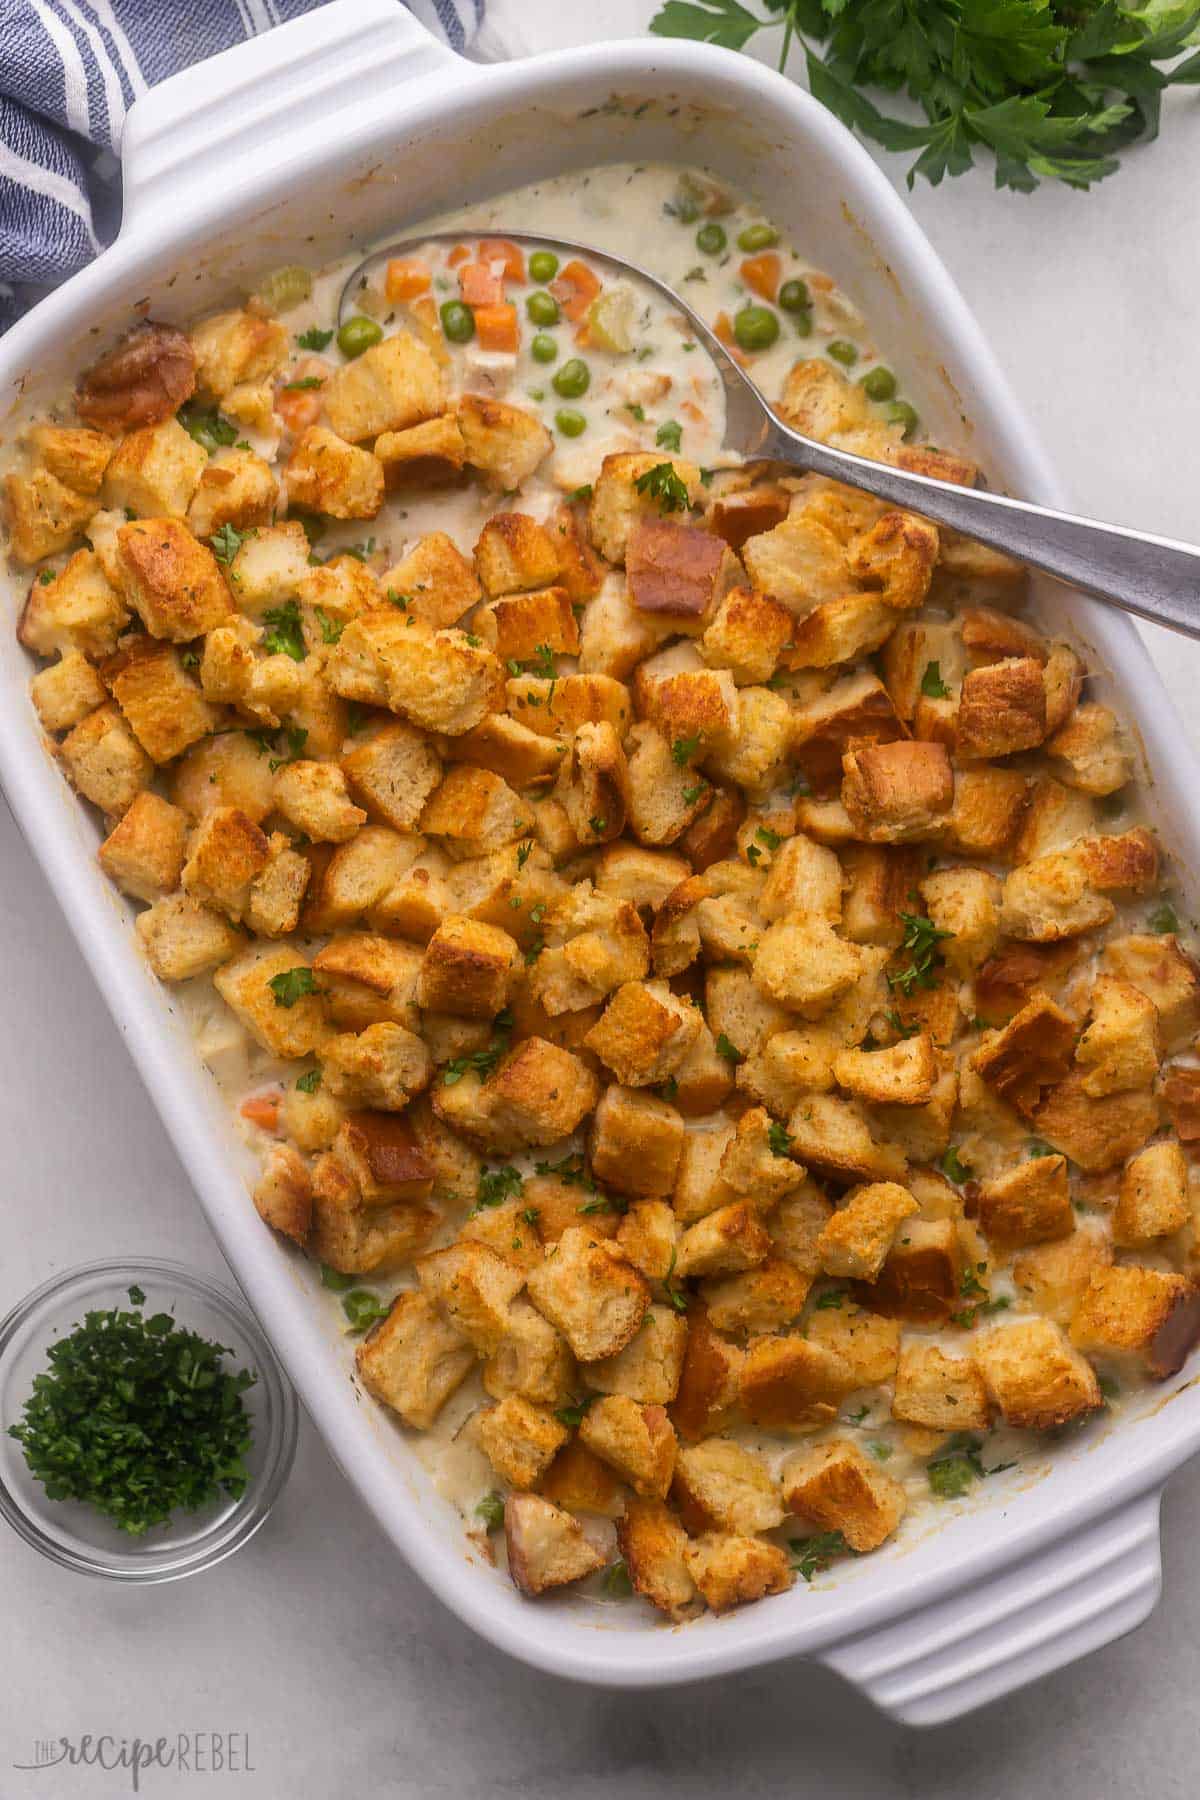 chicken and stuffing casserole in white baking dish with metal spoon scooping.